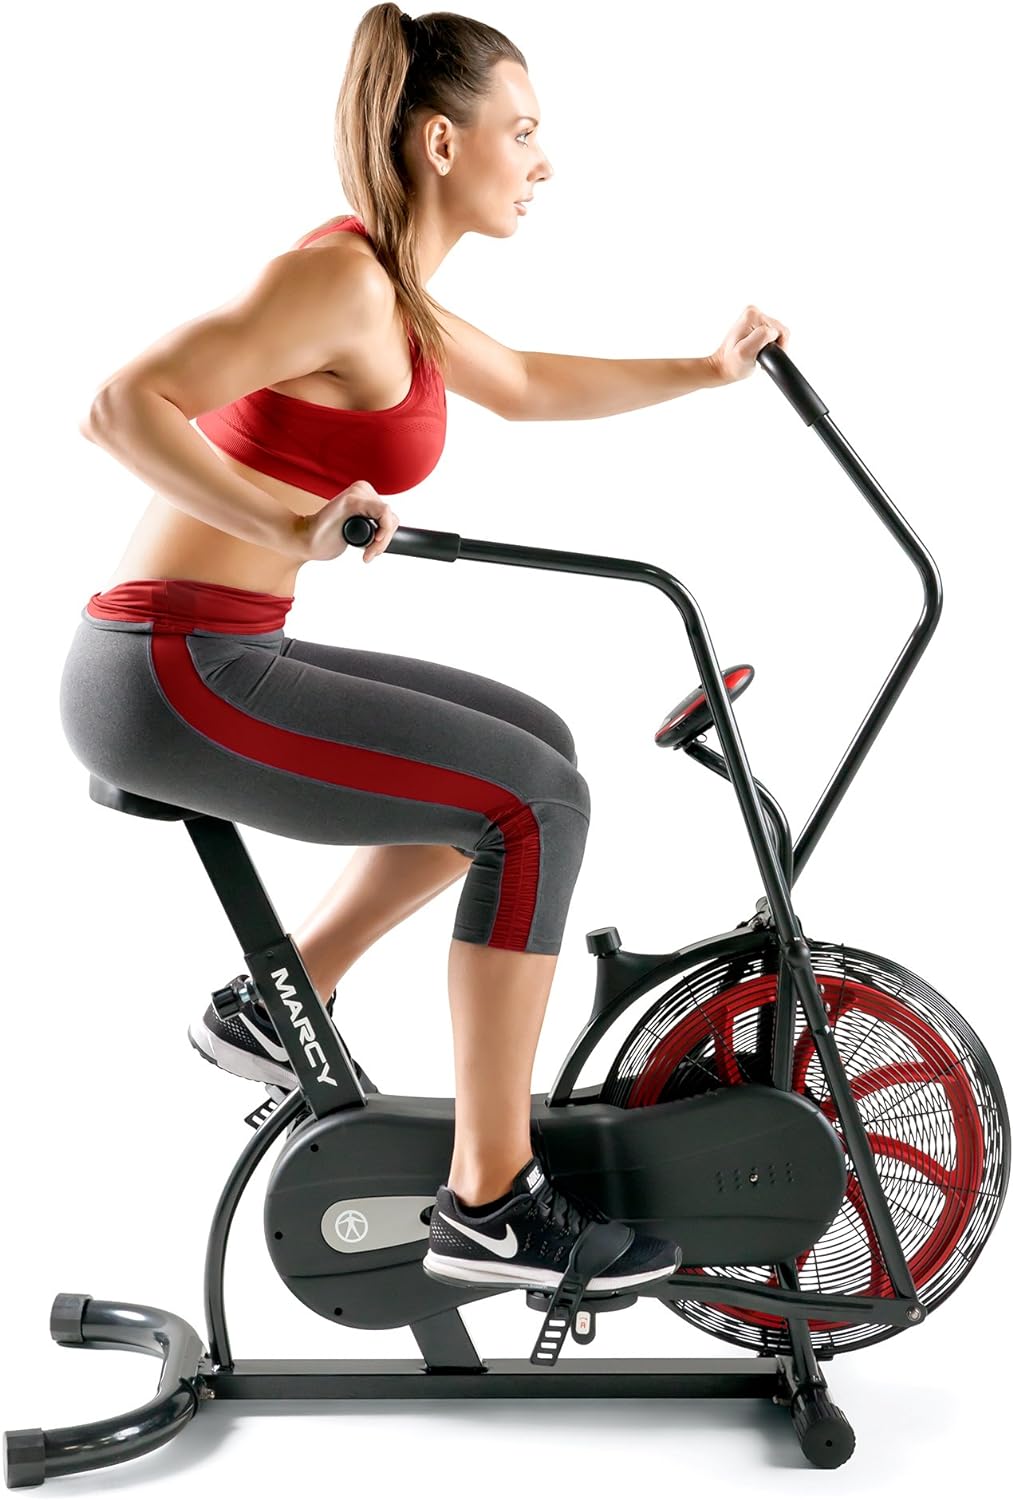 marcy air resistance exercise fan bike review